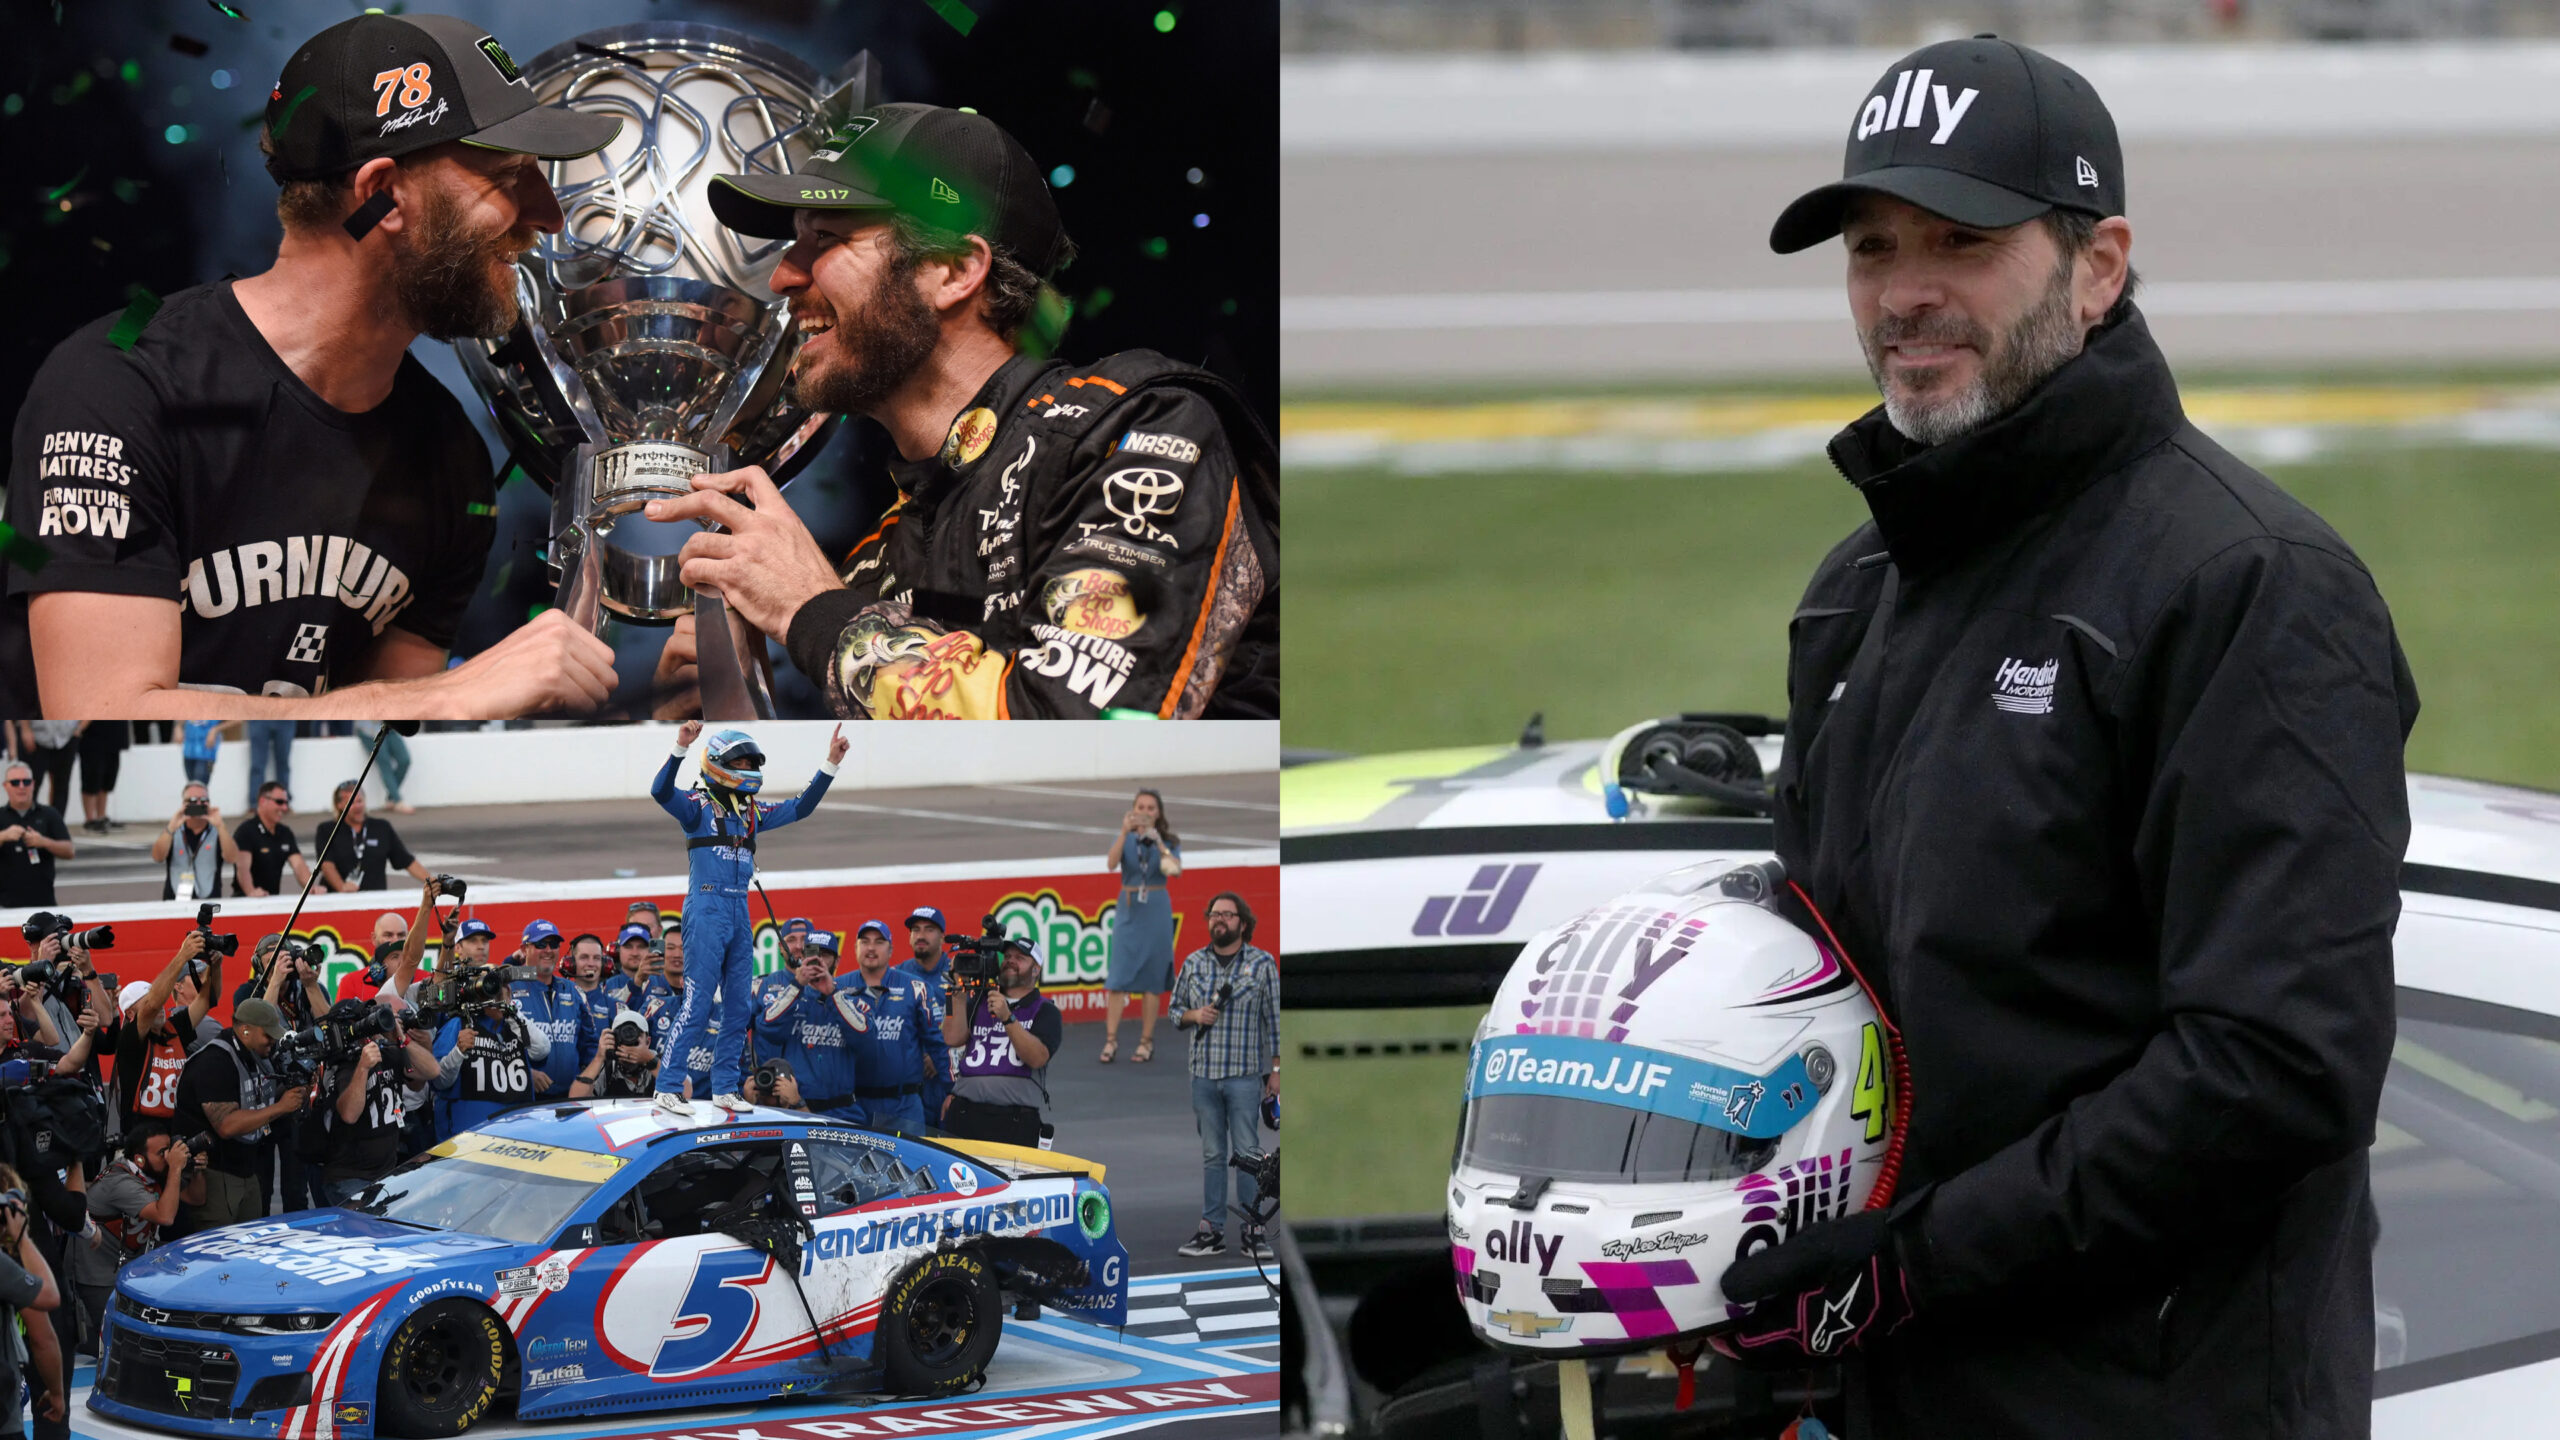 The Best Championship Performances in NASCAR History